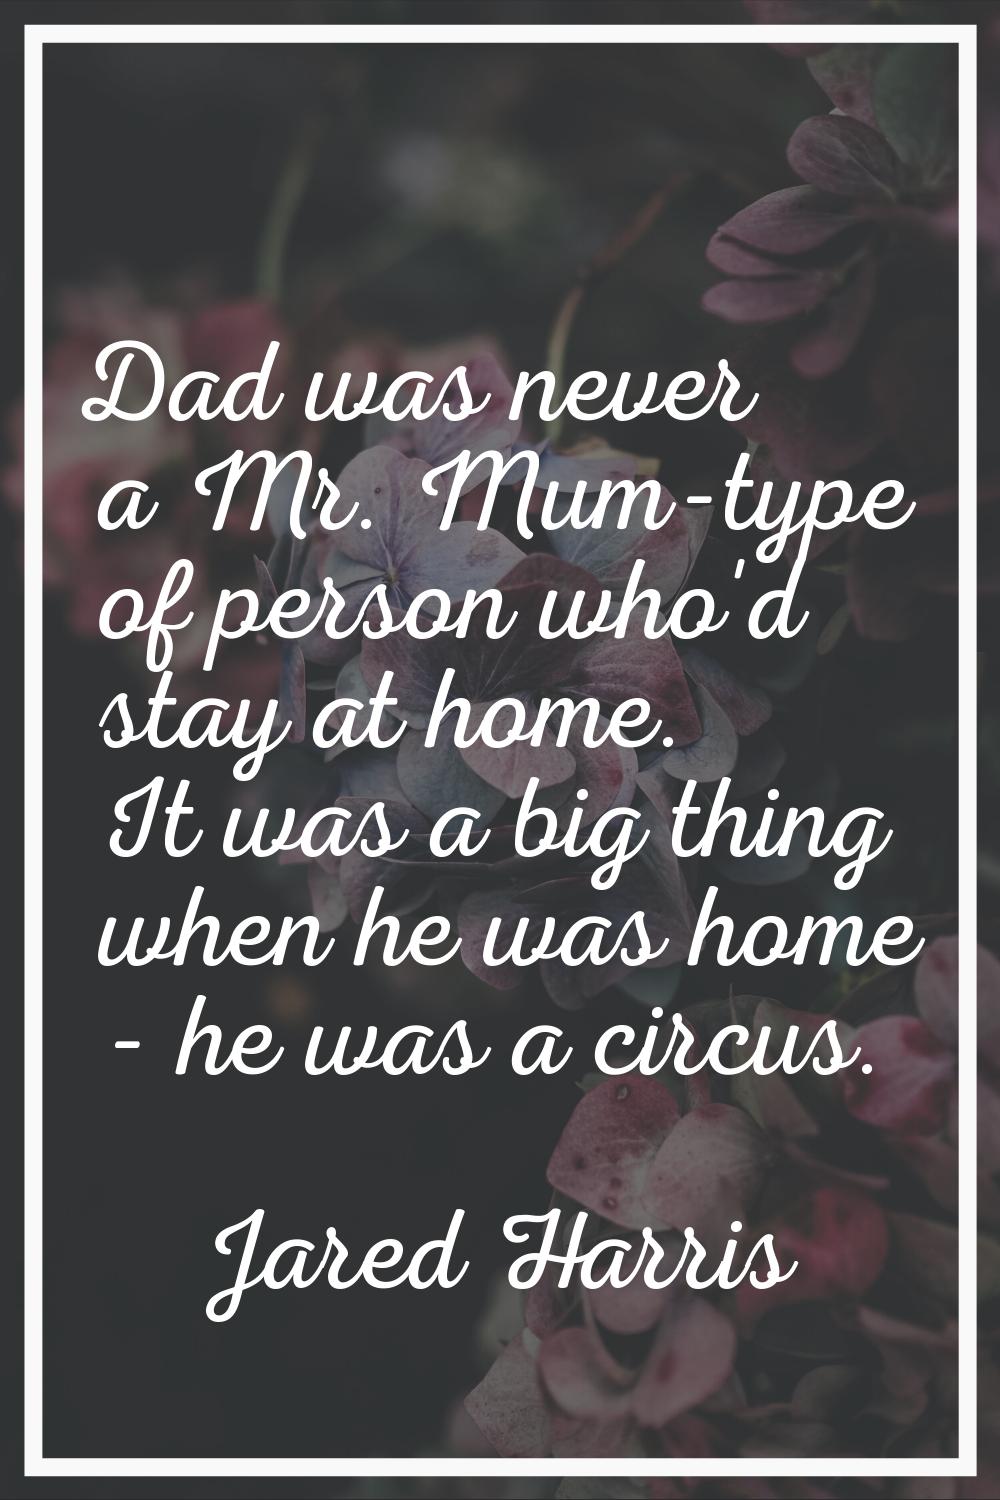 Dad was never a Mr. Mum-type of person who'd stay at home. It was a big thing when he was home - he